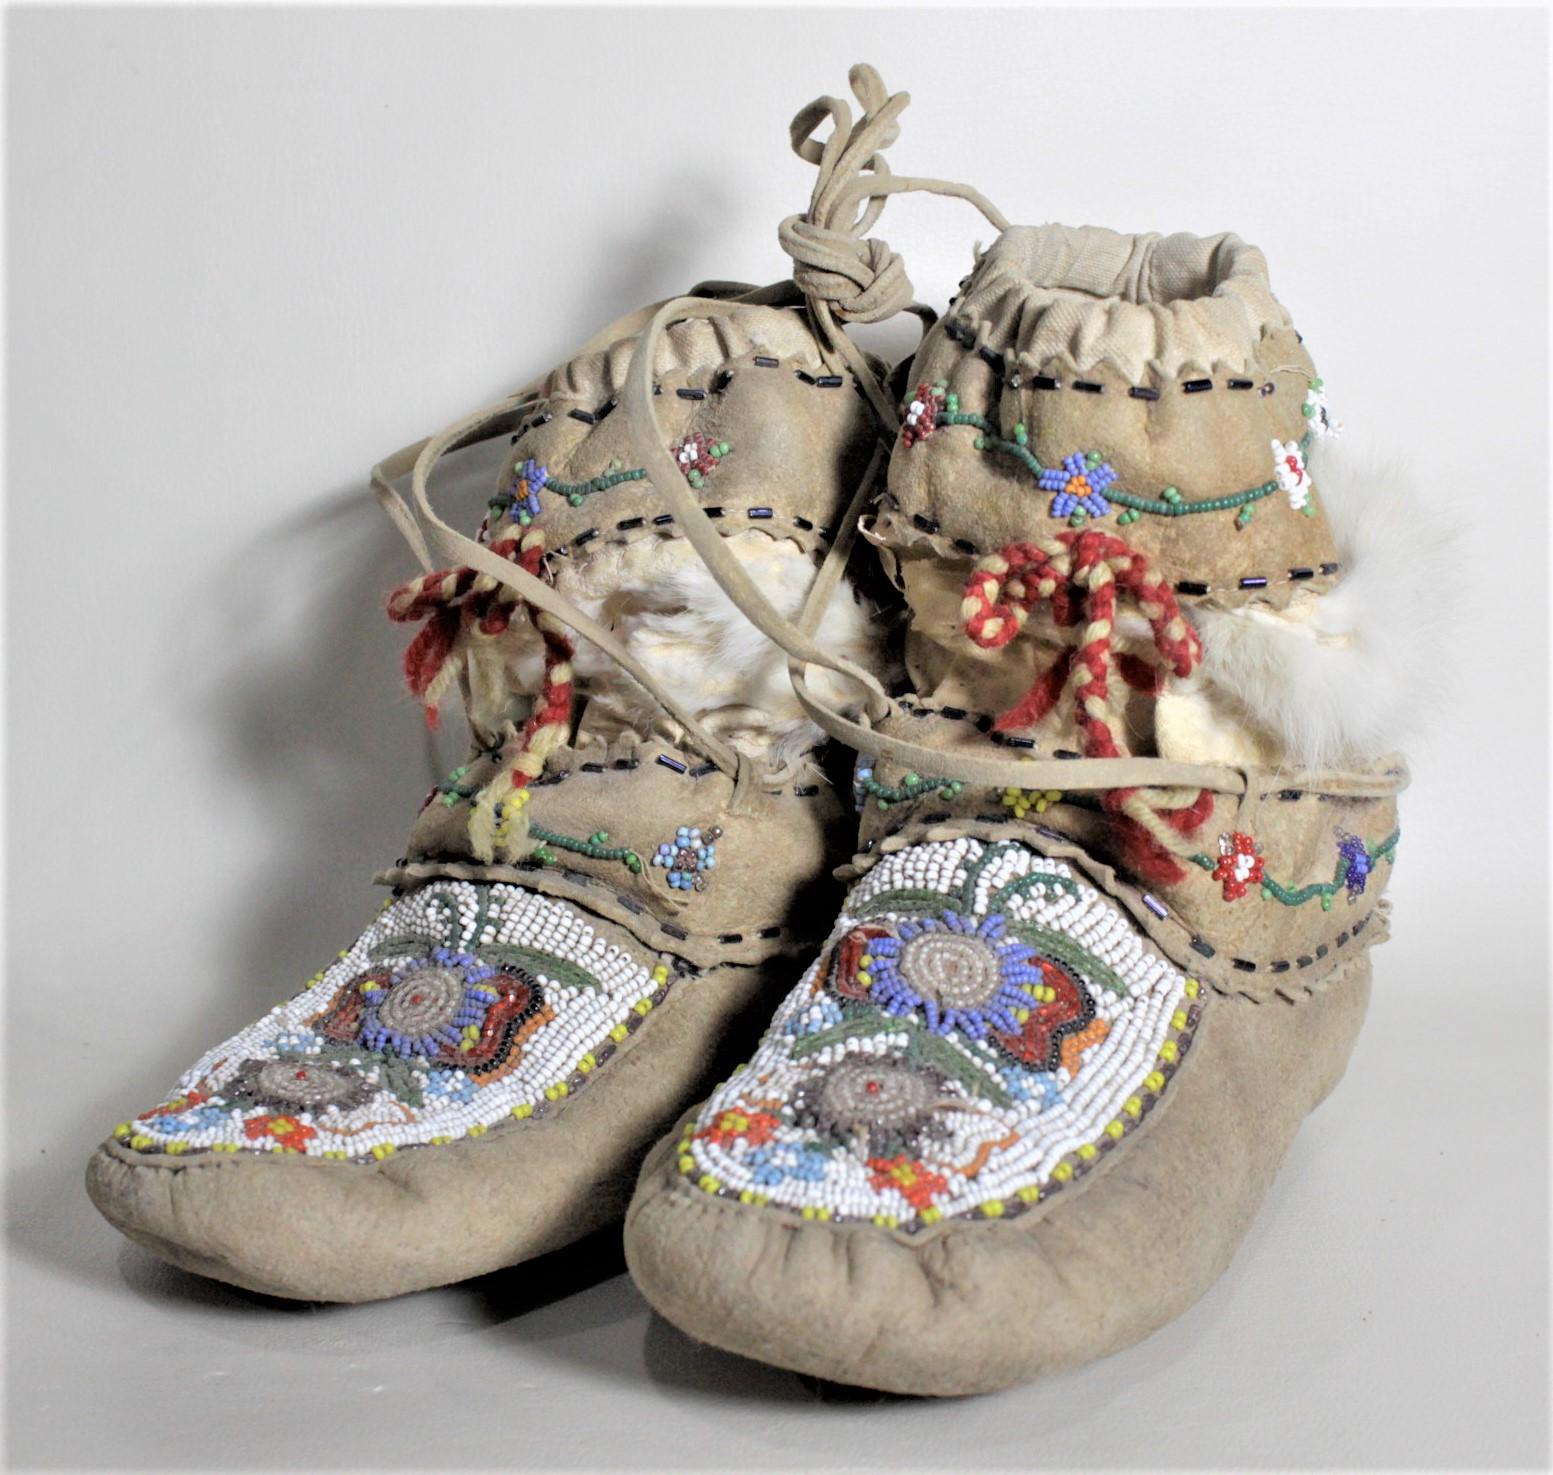 This pair of Indigenous American beaded boots are presumed to have been made in North America and in the United States, but it not known what Band they were made by. The boots are made completely of leather with brightly colored glass beaded